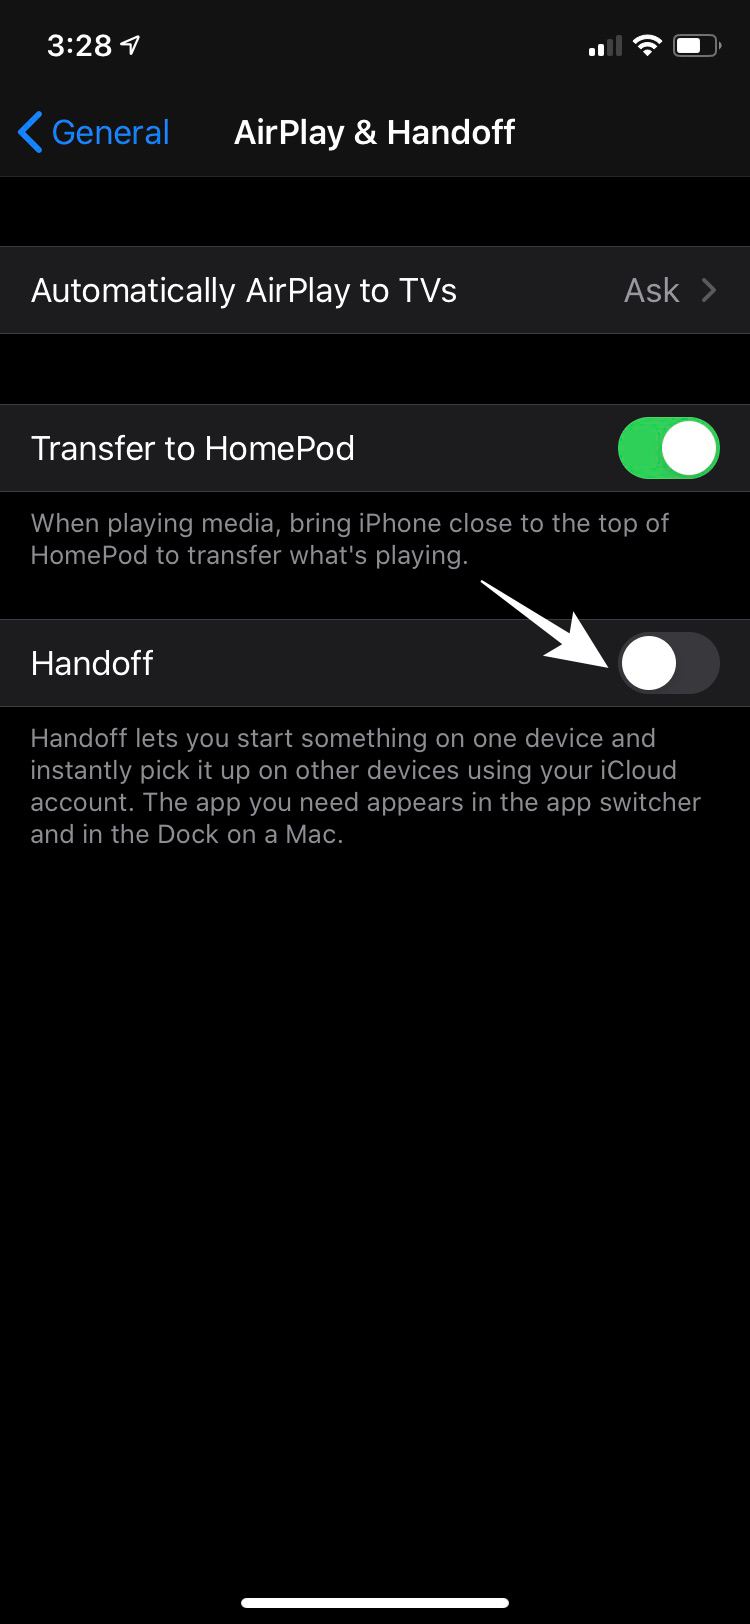 Streaming to HomePod from my iPhone is visible on other iPhone